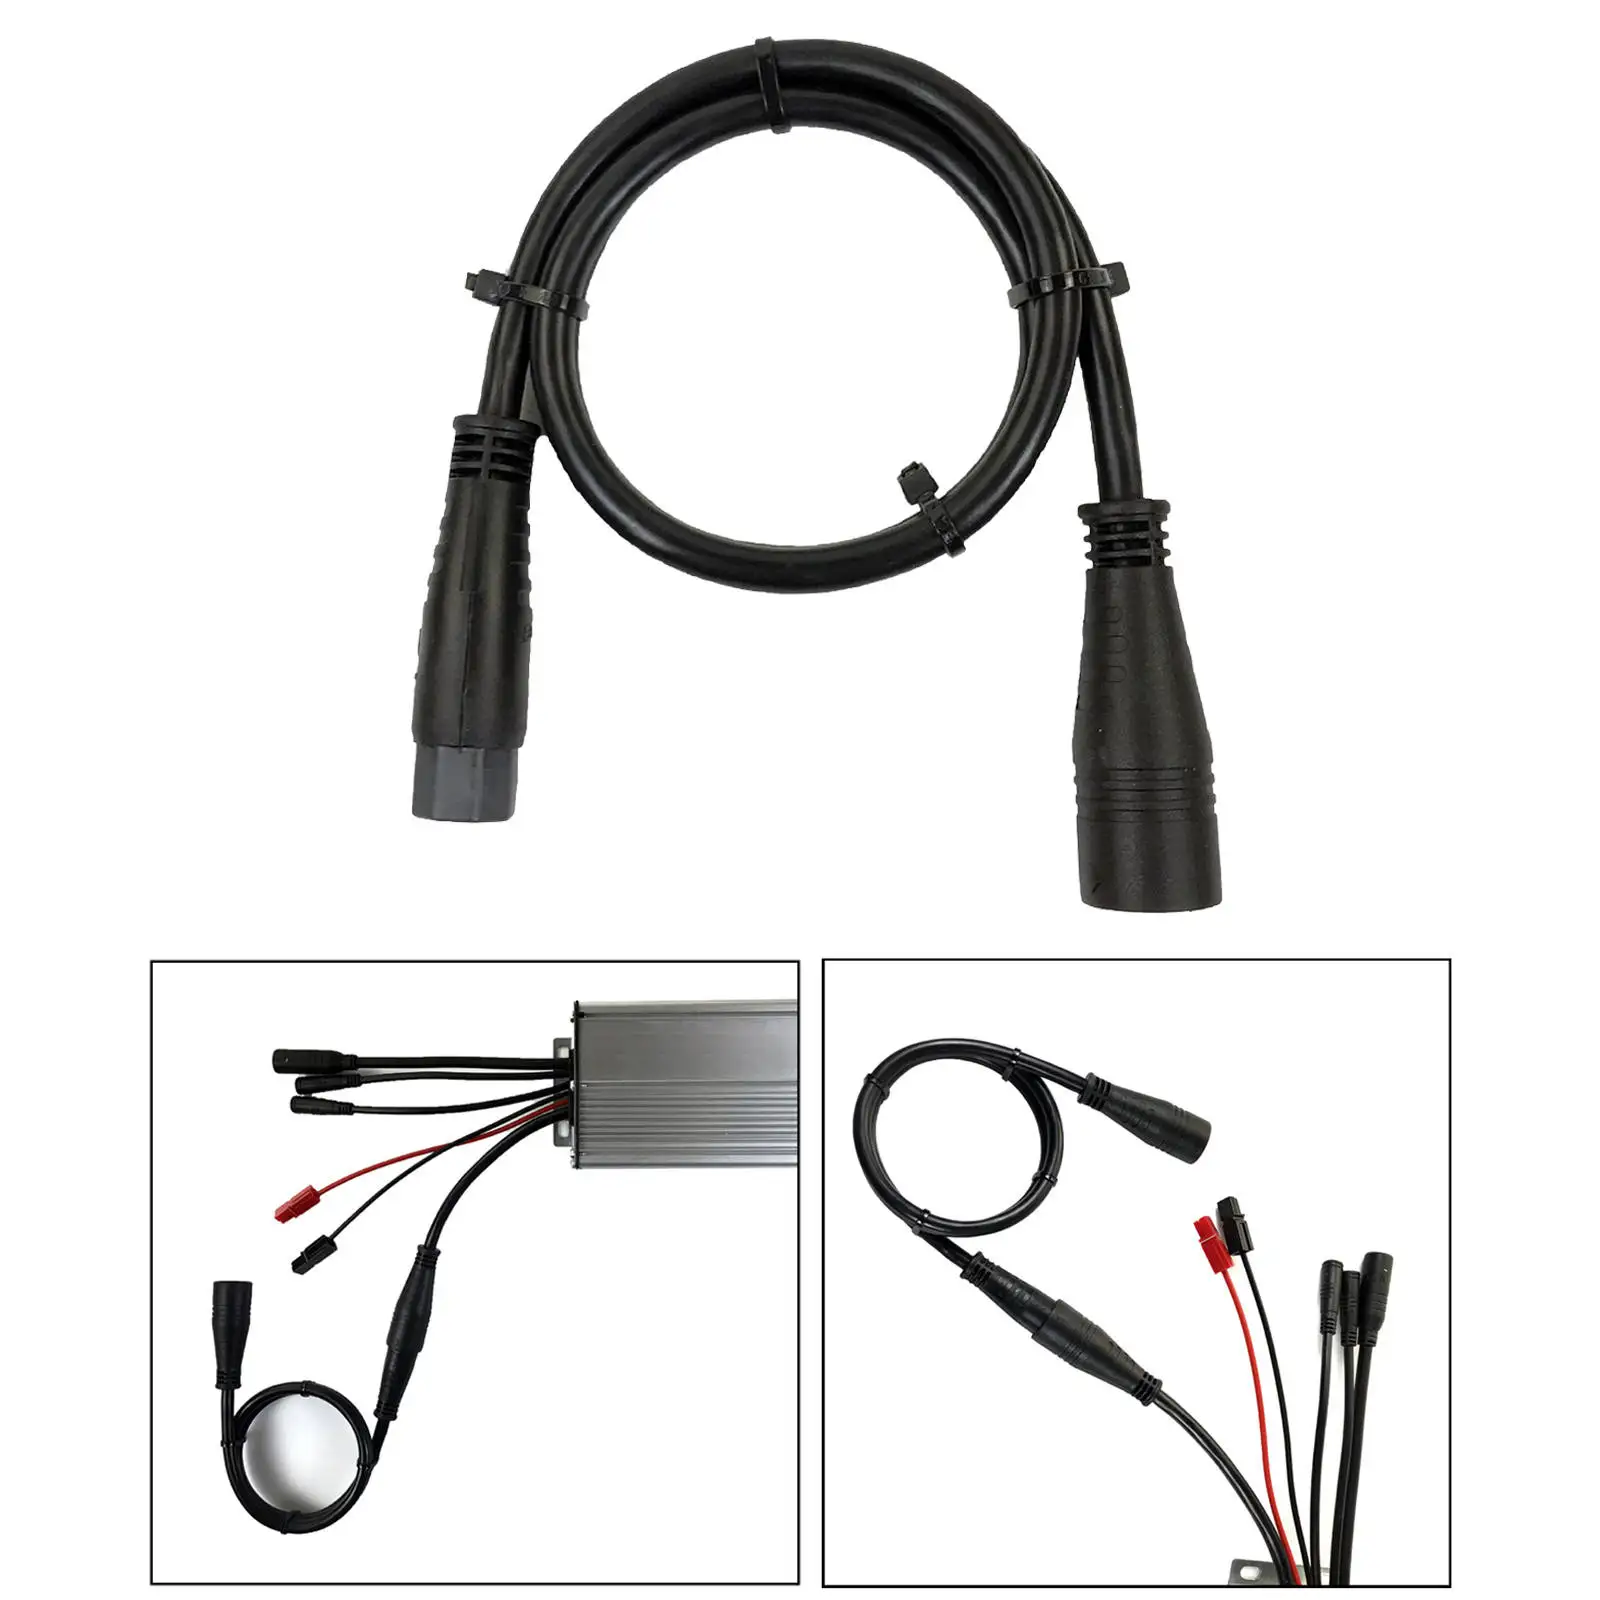 3-Pin Motor Extension Cable Female to Male 60cm Electric Bike Motor Cables for E Bike Electric Bicycle Accessories 1000W Motor